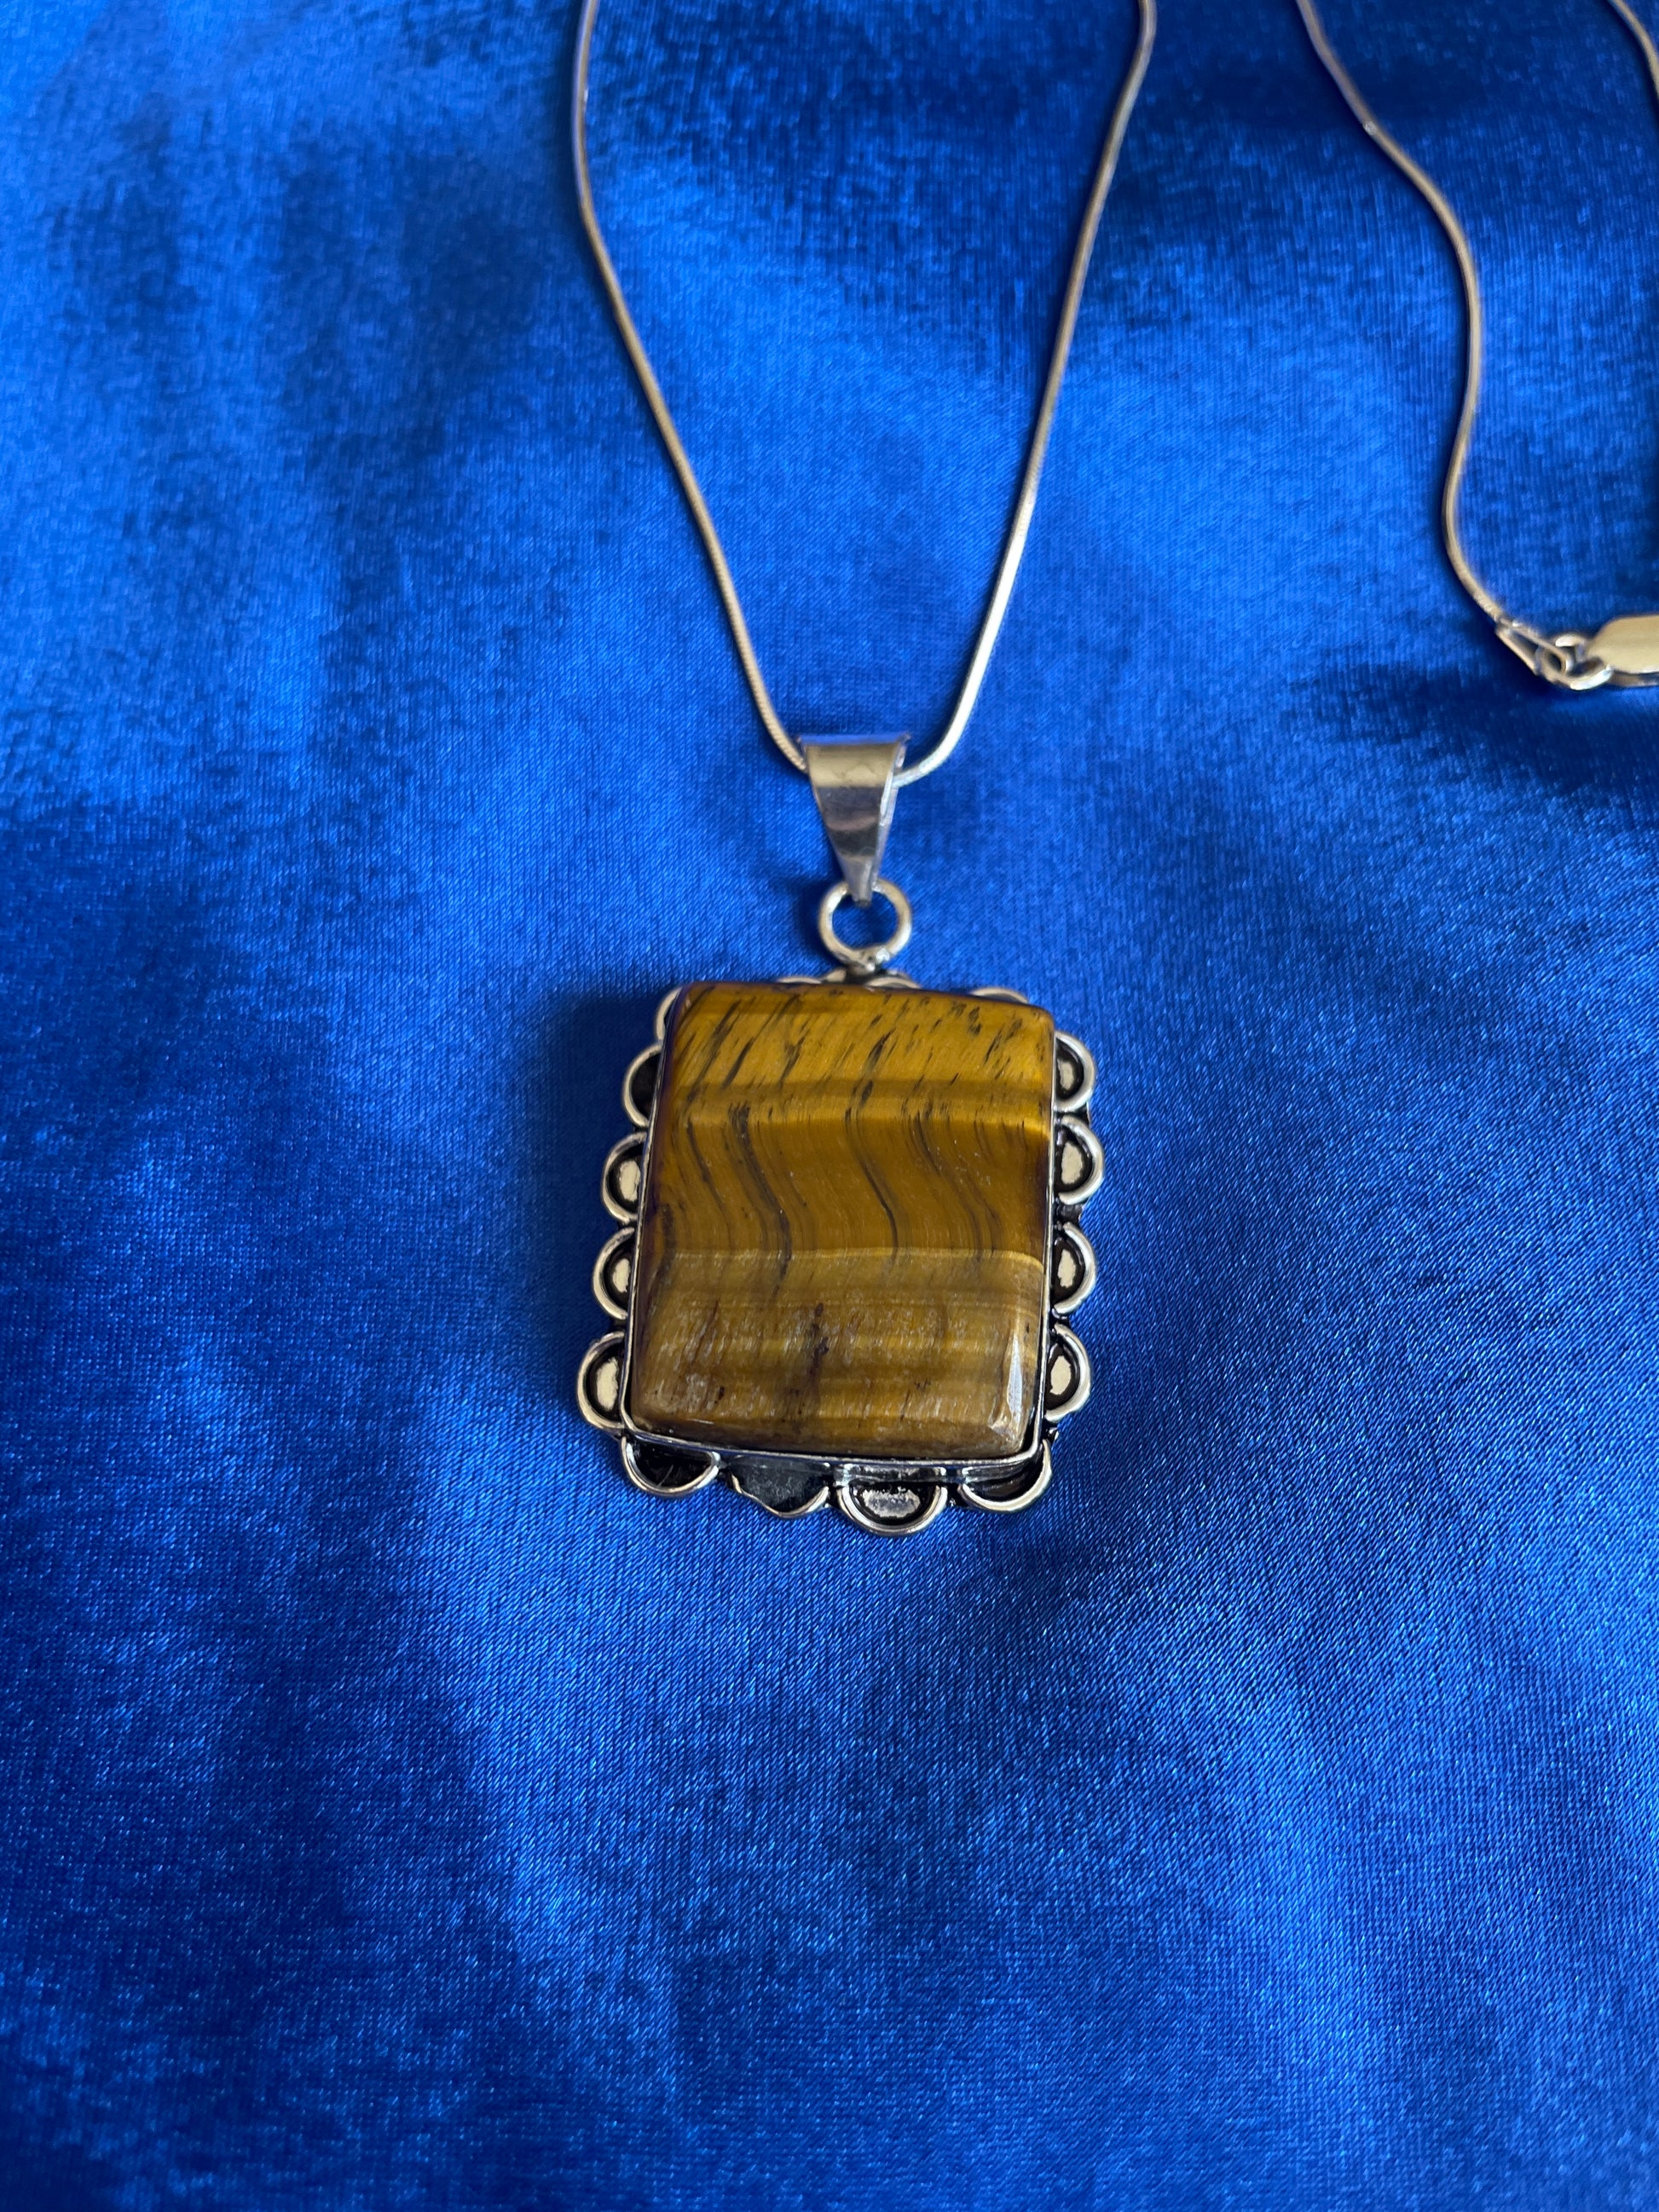  2000s Silver Plated Tigers Eye Pendant Necklace